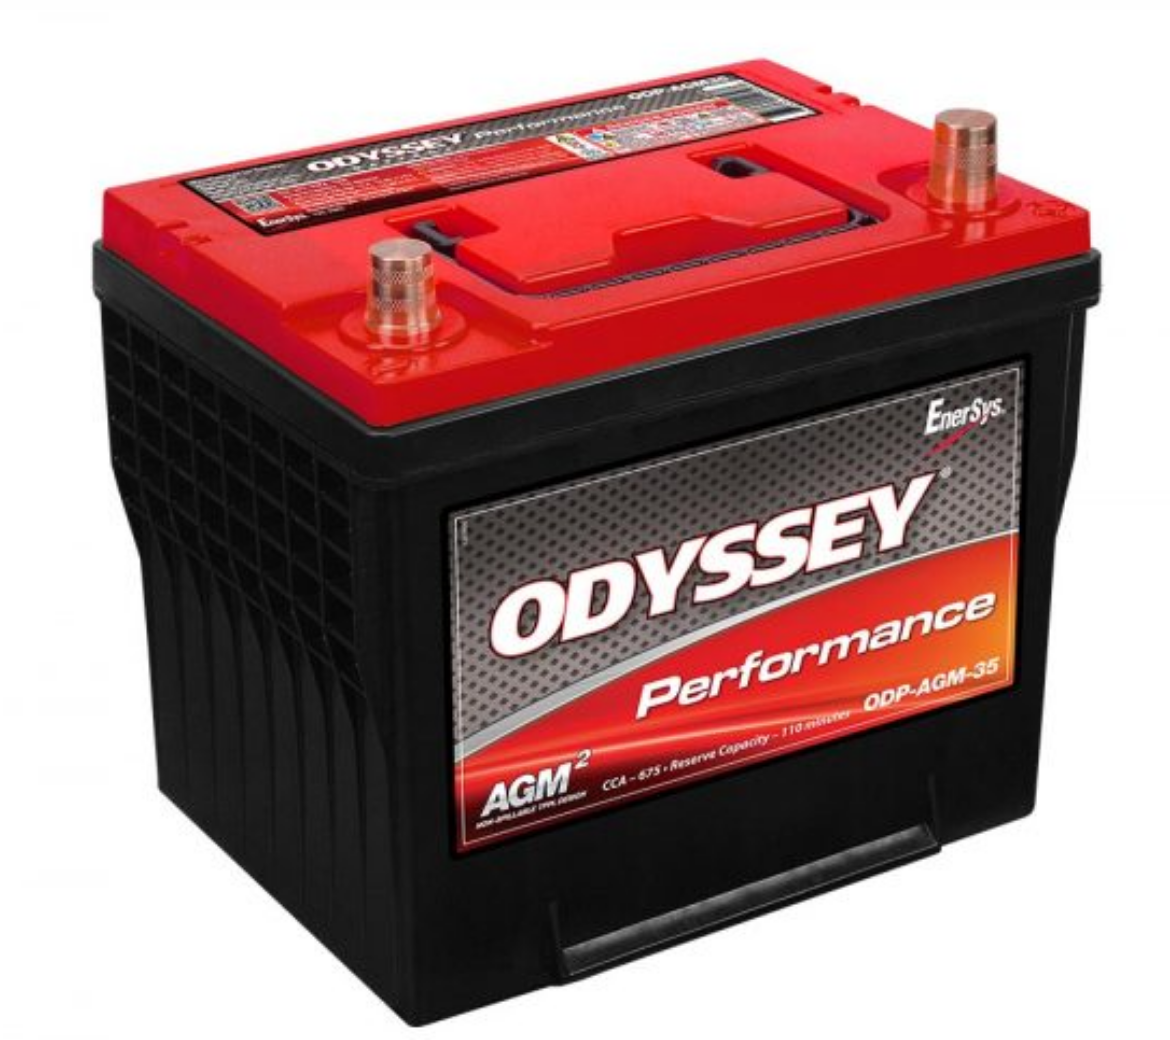 Picture of ODP-AGM35 12VOLT 675CCA 59AH ODYSSEY BATTERY - RHP